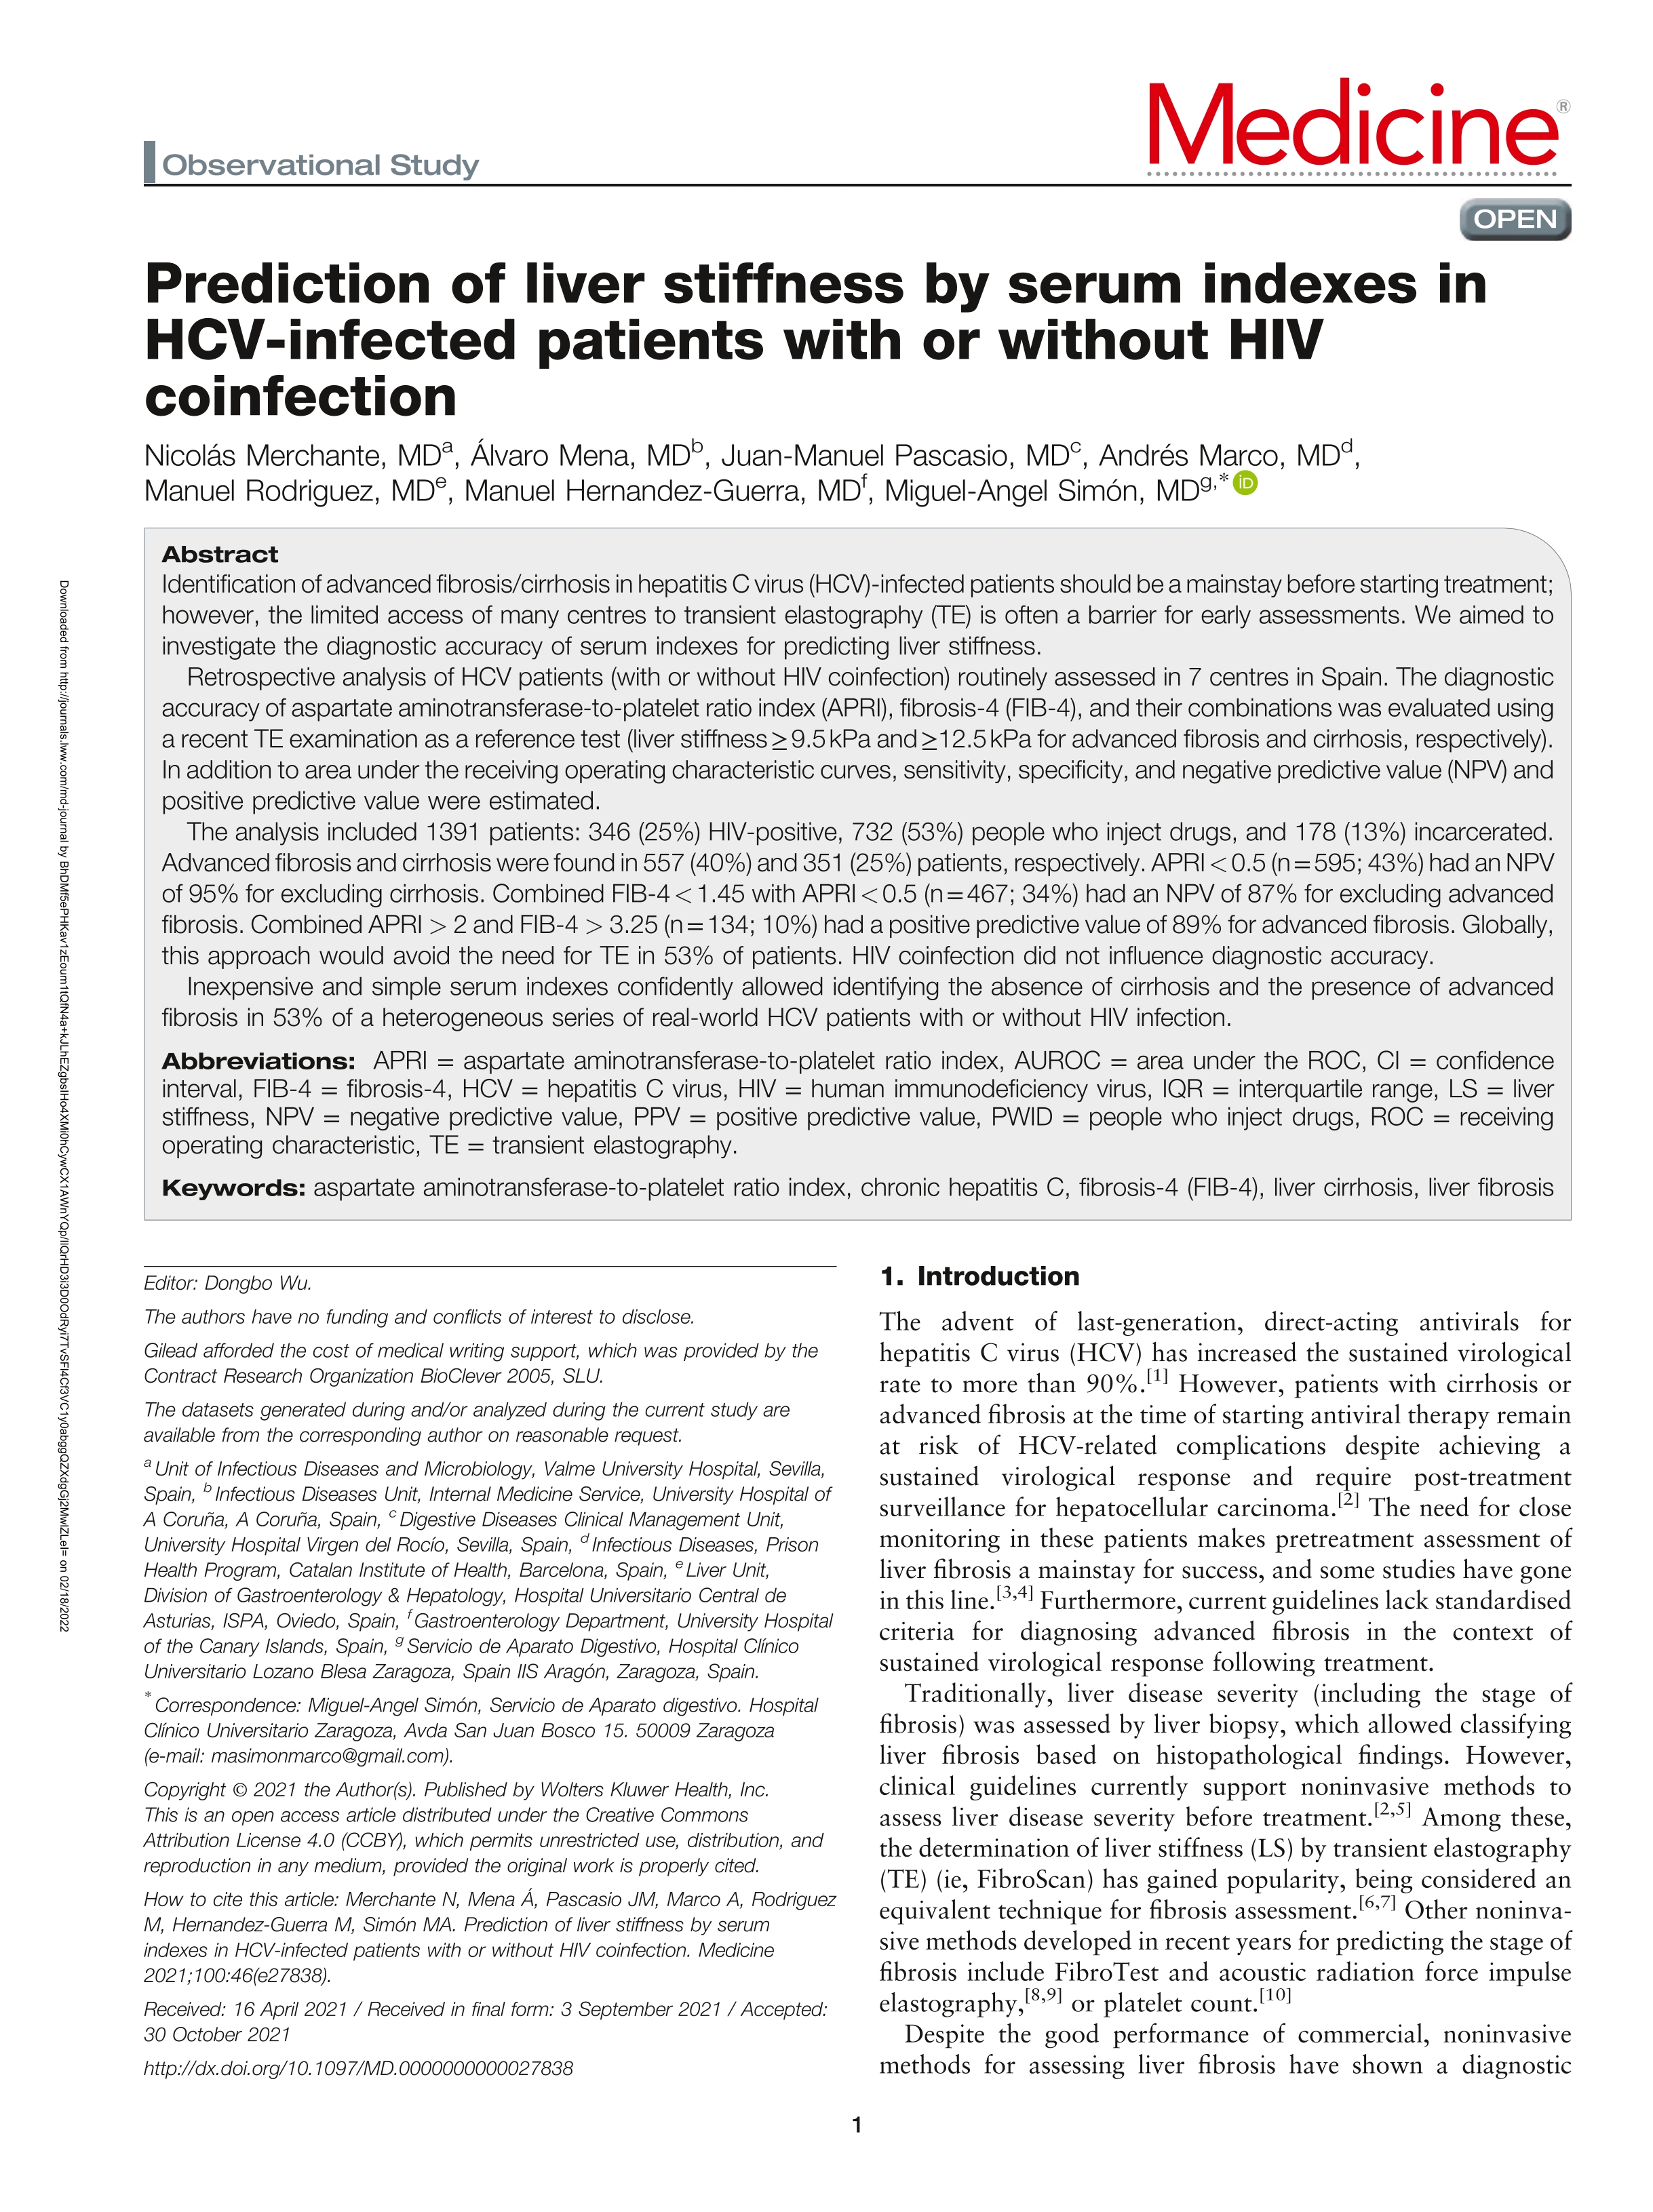 Prediction of liver stiffness by serum indexes in HCV-infected patients with or without HIV coinfection